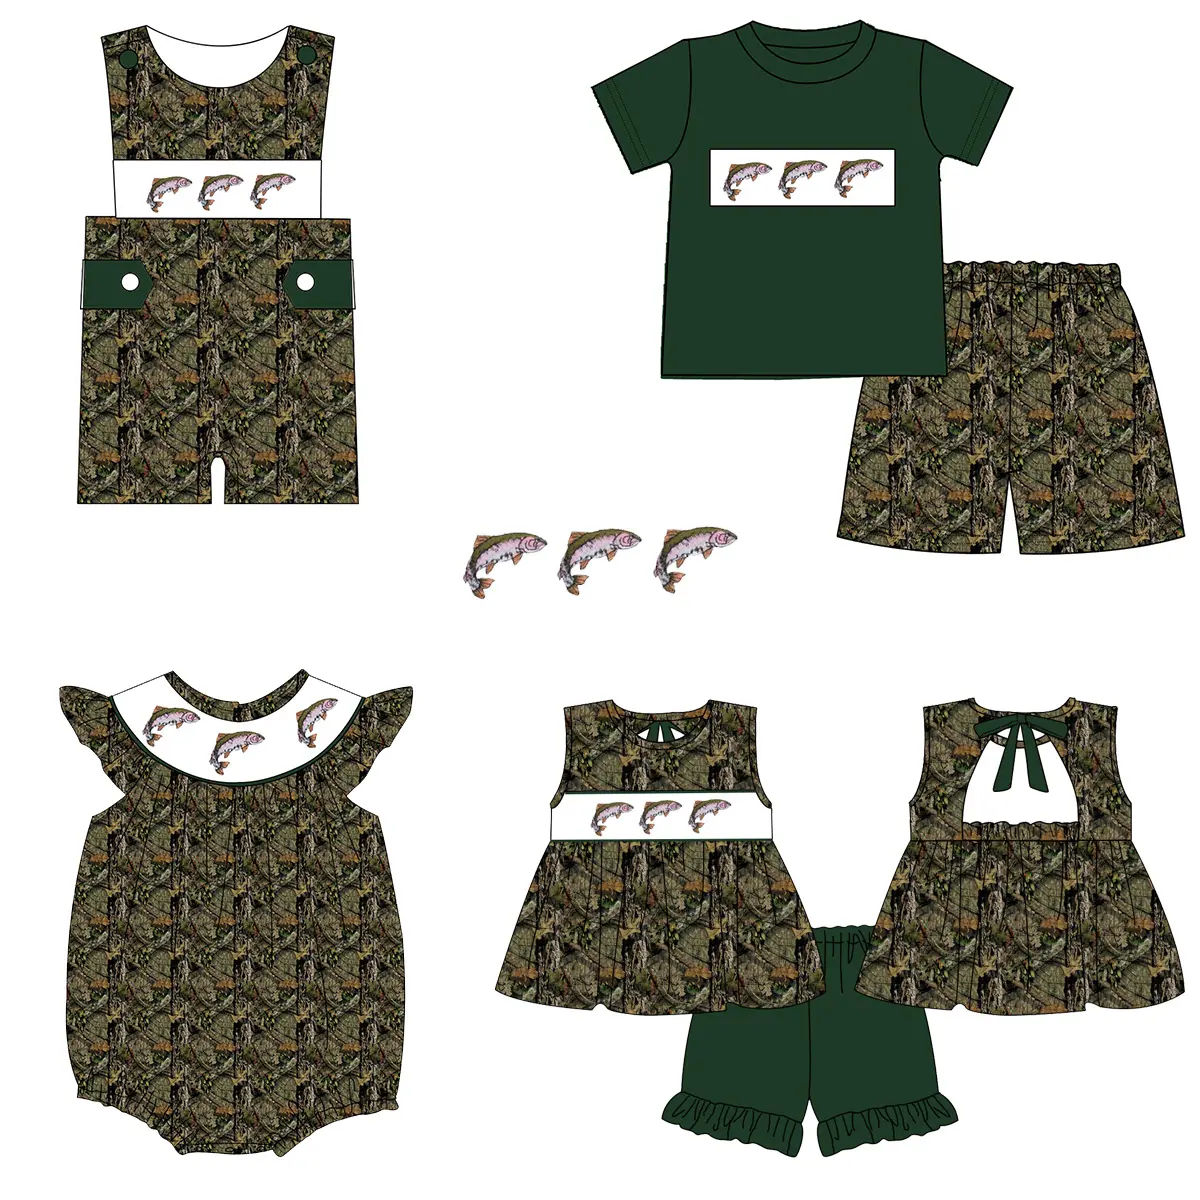 New design summer custom kids outfits boutique fish embroidery woven cotton cute printing shorts infant boy sets